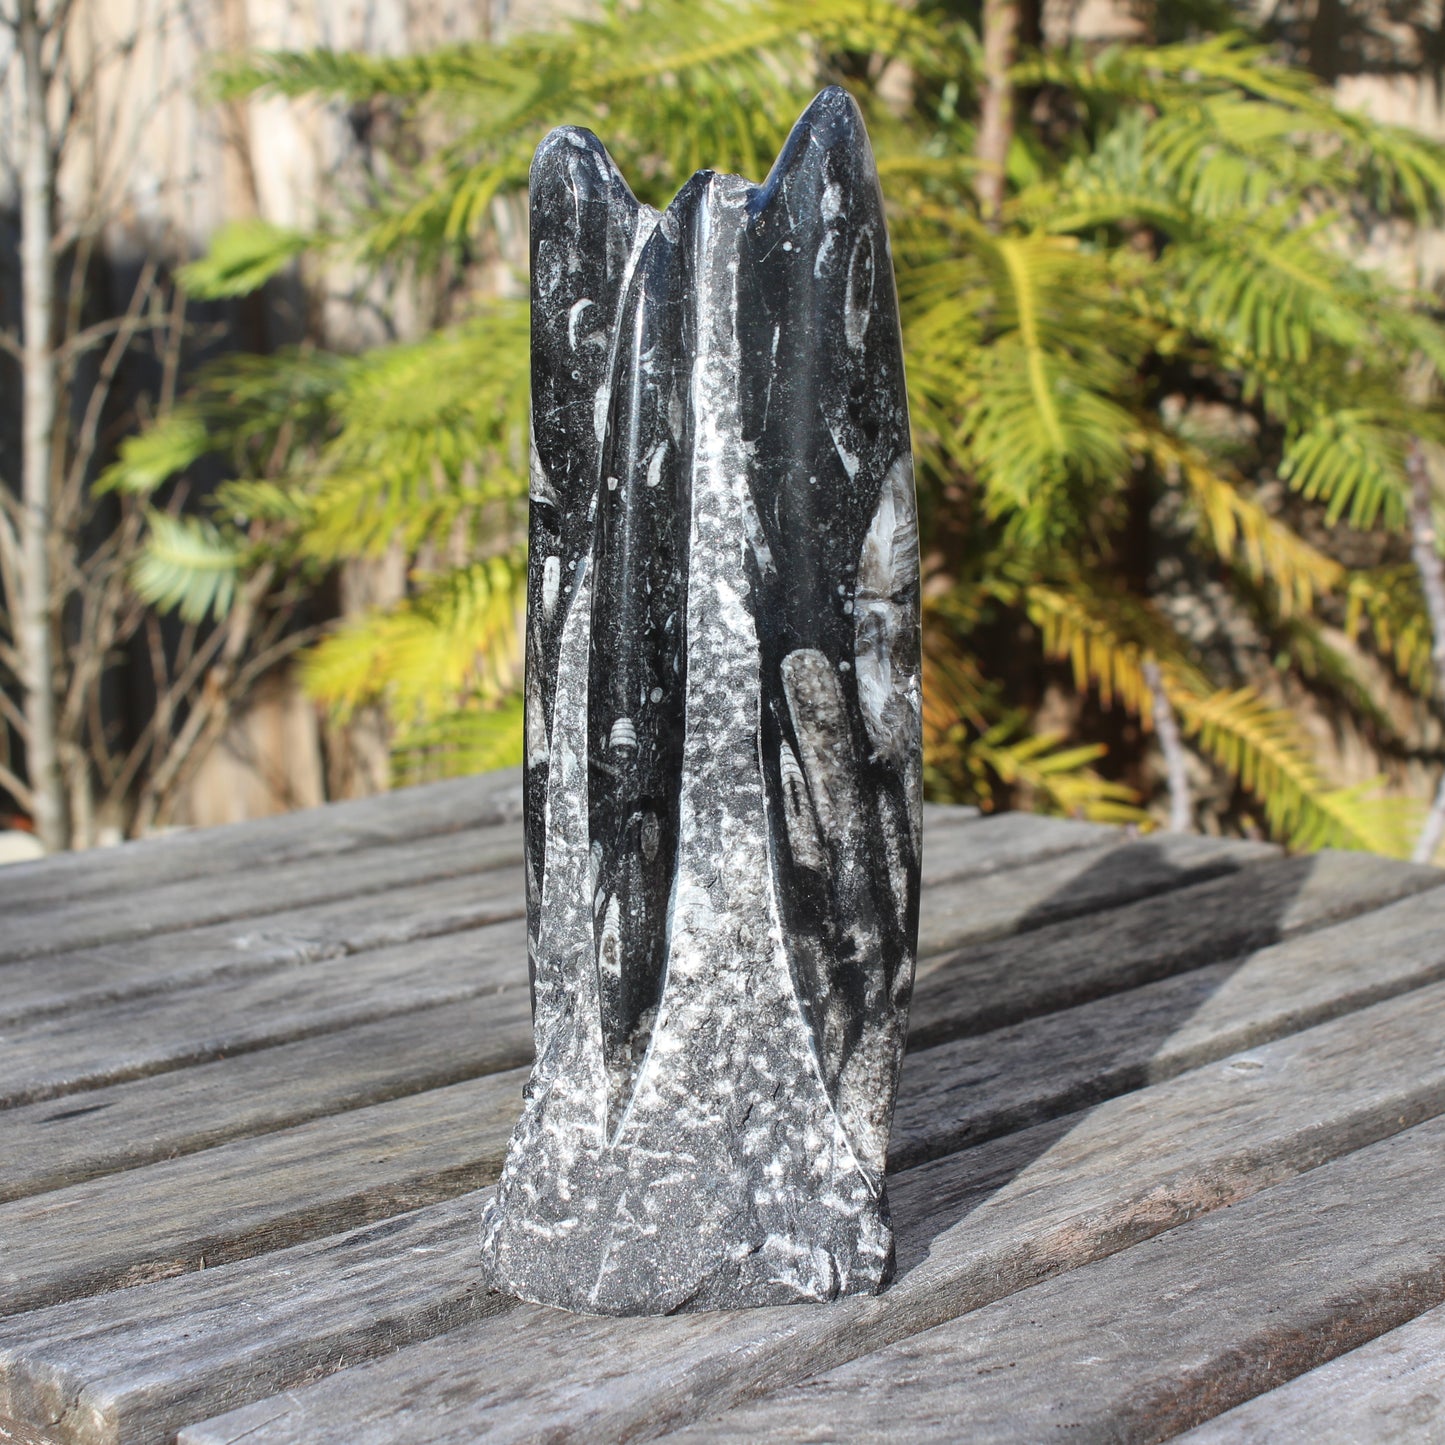 Orthoceras fossil tower 1279g